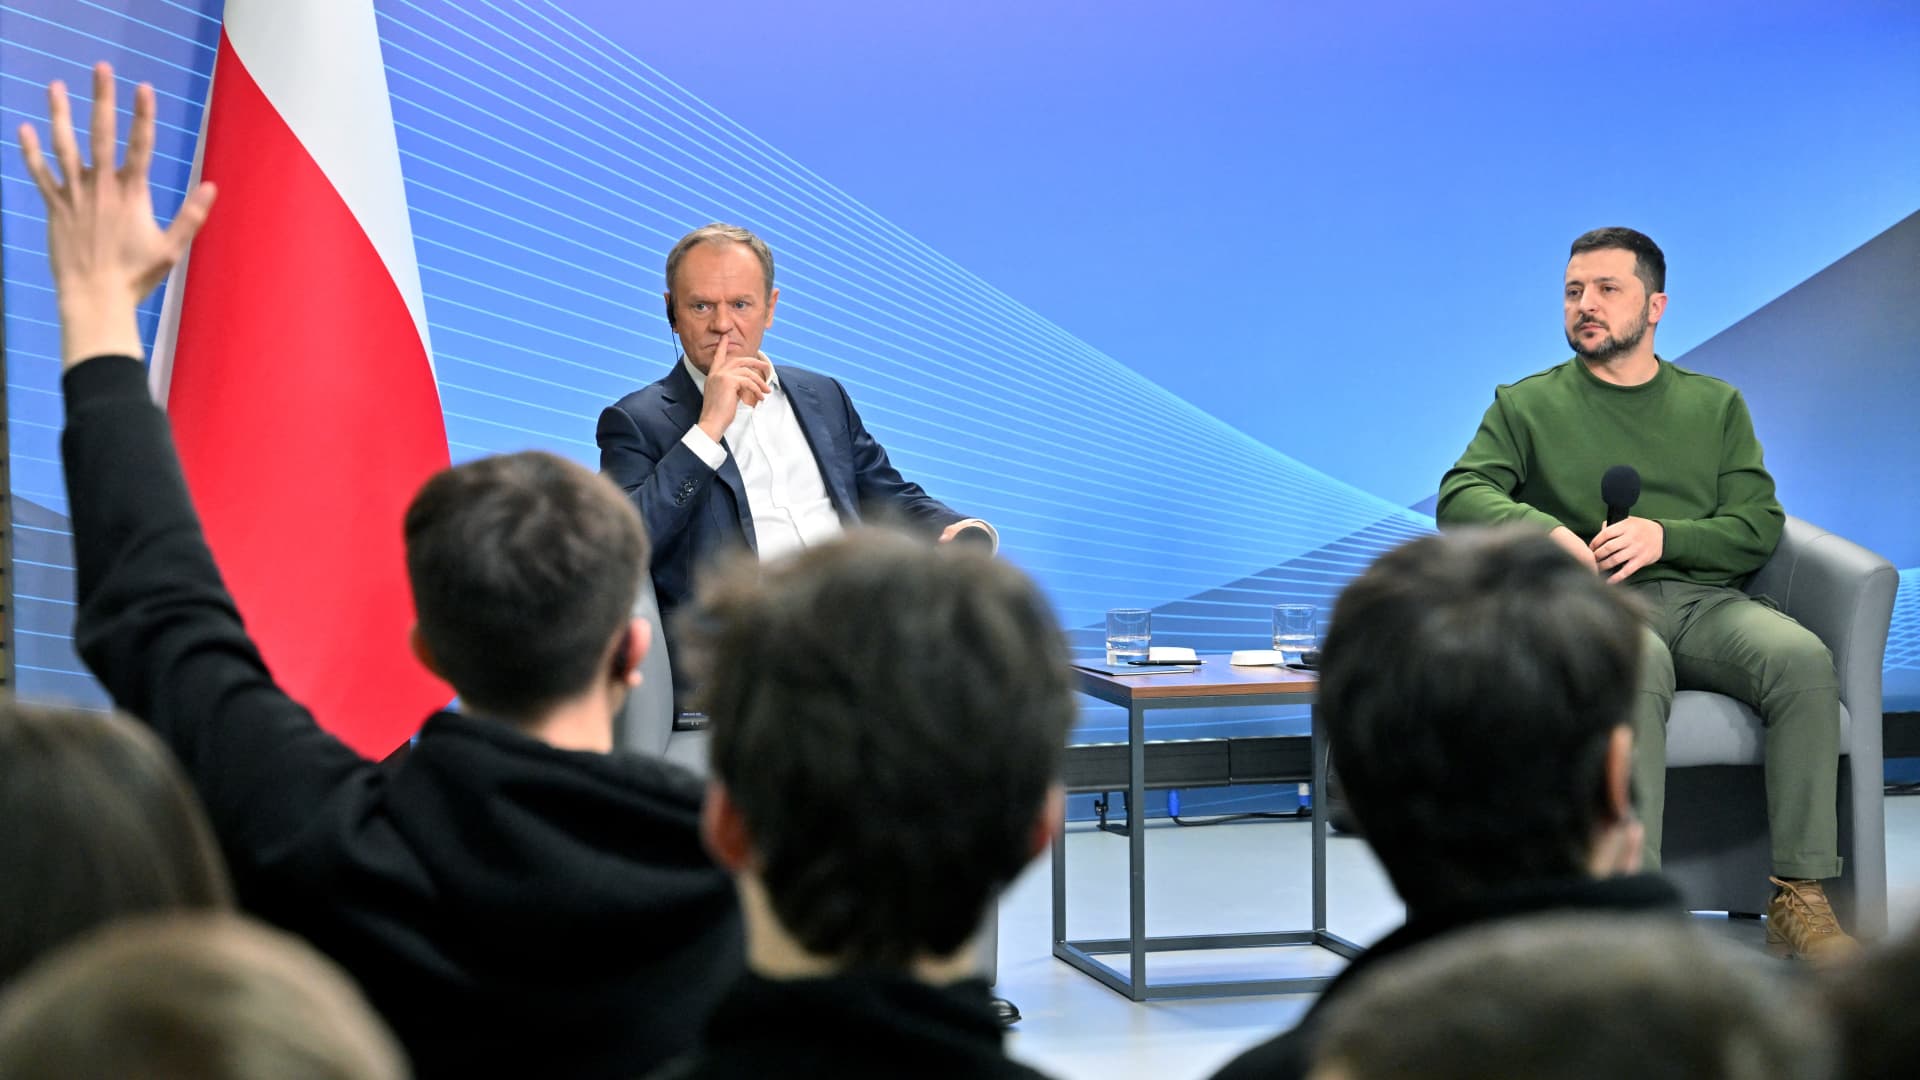 Ukrainian President Volodymyr Zelensky (R) and Polish Prime Minister Donald Tusk take part in a meeting with Ukrainian students in Kyiv on January 22, 2024. (Photo by Sergei SUPINSKY / AFP) (Photo by SERGEI SUPINSKY/AFP via Getty Images)